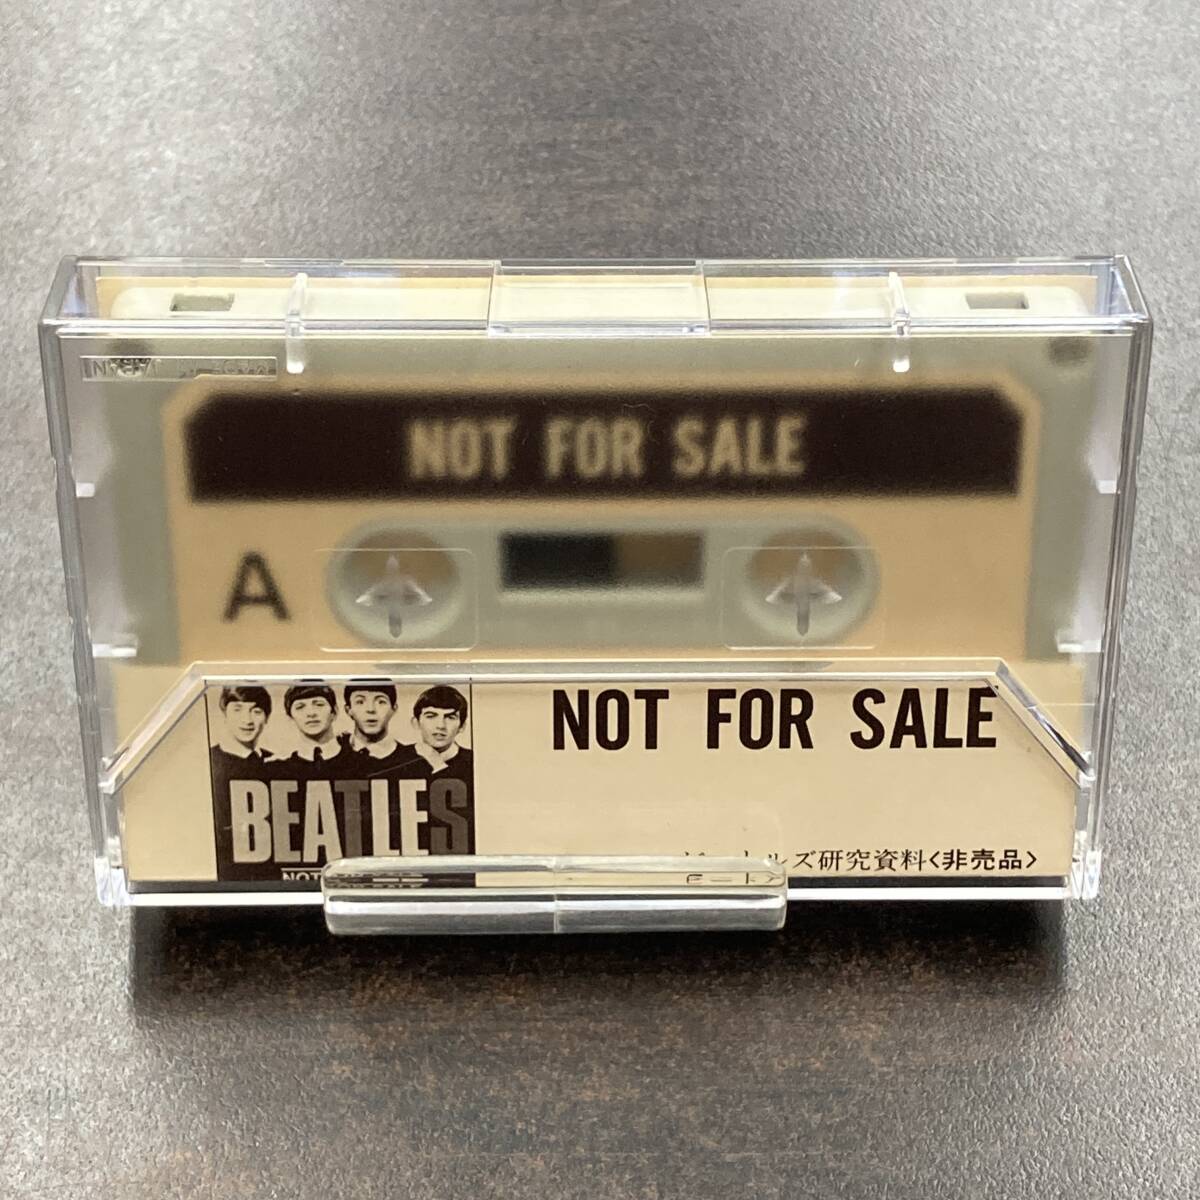 1218M ザ・ビートルズ 研究資料 NOT FOR SALE カセットテープ / THE BEATLES Research materials Cassette Tapeの画像5